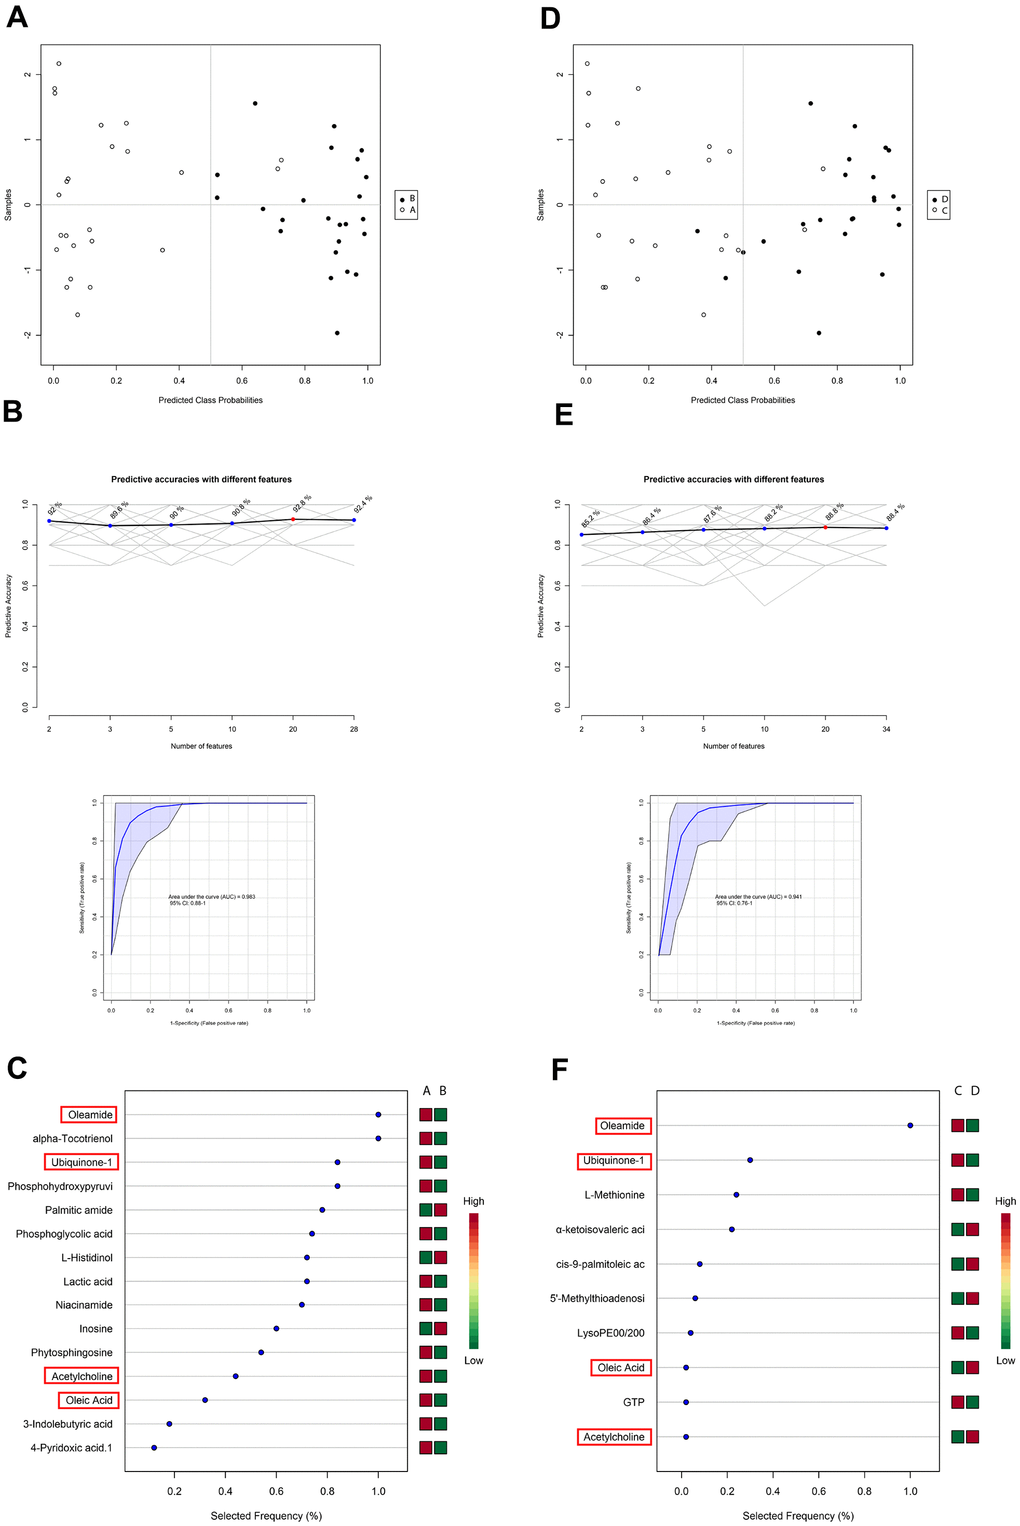 Support vector machine (SVM) analysis of metabolites in blood samples in the PACU and at 24 h after surgery in patients with delayed and enhanced postoperative recovery. (A) SVM classification of samples in groups (A, B). (B) Specificity, sensitivity, and predictive accuracies of the (A, B) SVM model. (C) Features’ importance ranking of the (A, B) SVM model. (D) SVM classification of samples belonging to groups (C, D). (E) Specificity, sensitivity, and predictive accuracies of the (C, D) SVM model. (F) Features’ importance ranking of the (C, D) SVM model. The red cubes represent higher importance, and the green cubes represent lower importance in the SVM model.